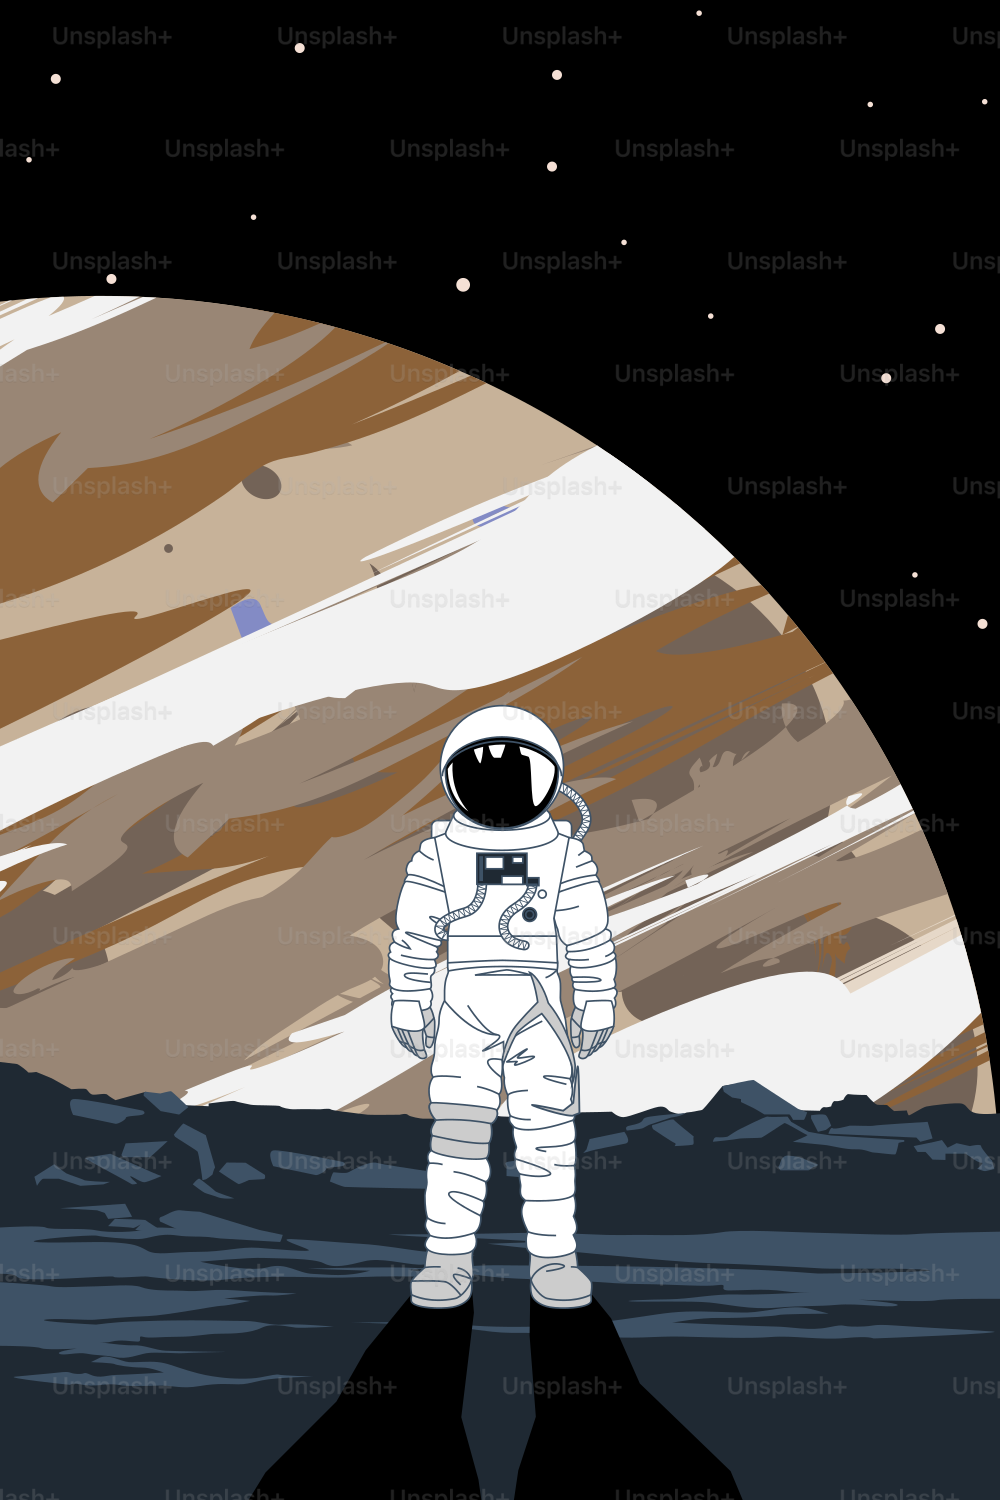 Astronaut standing against planet in background